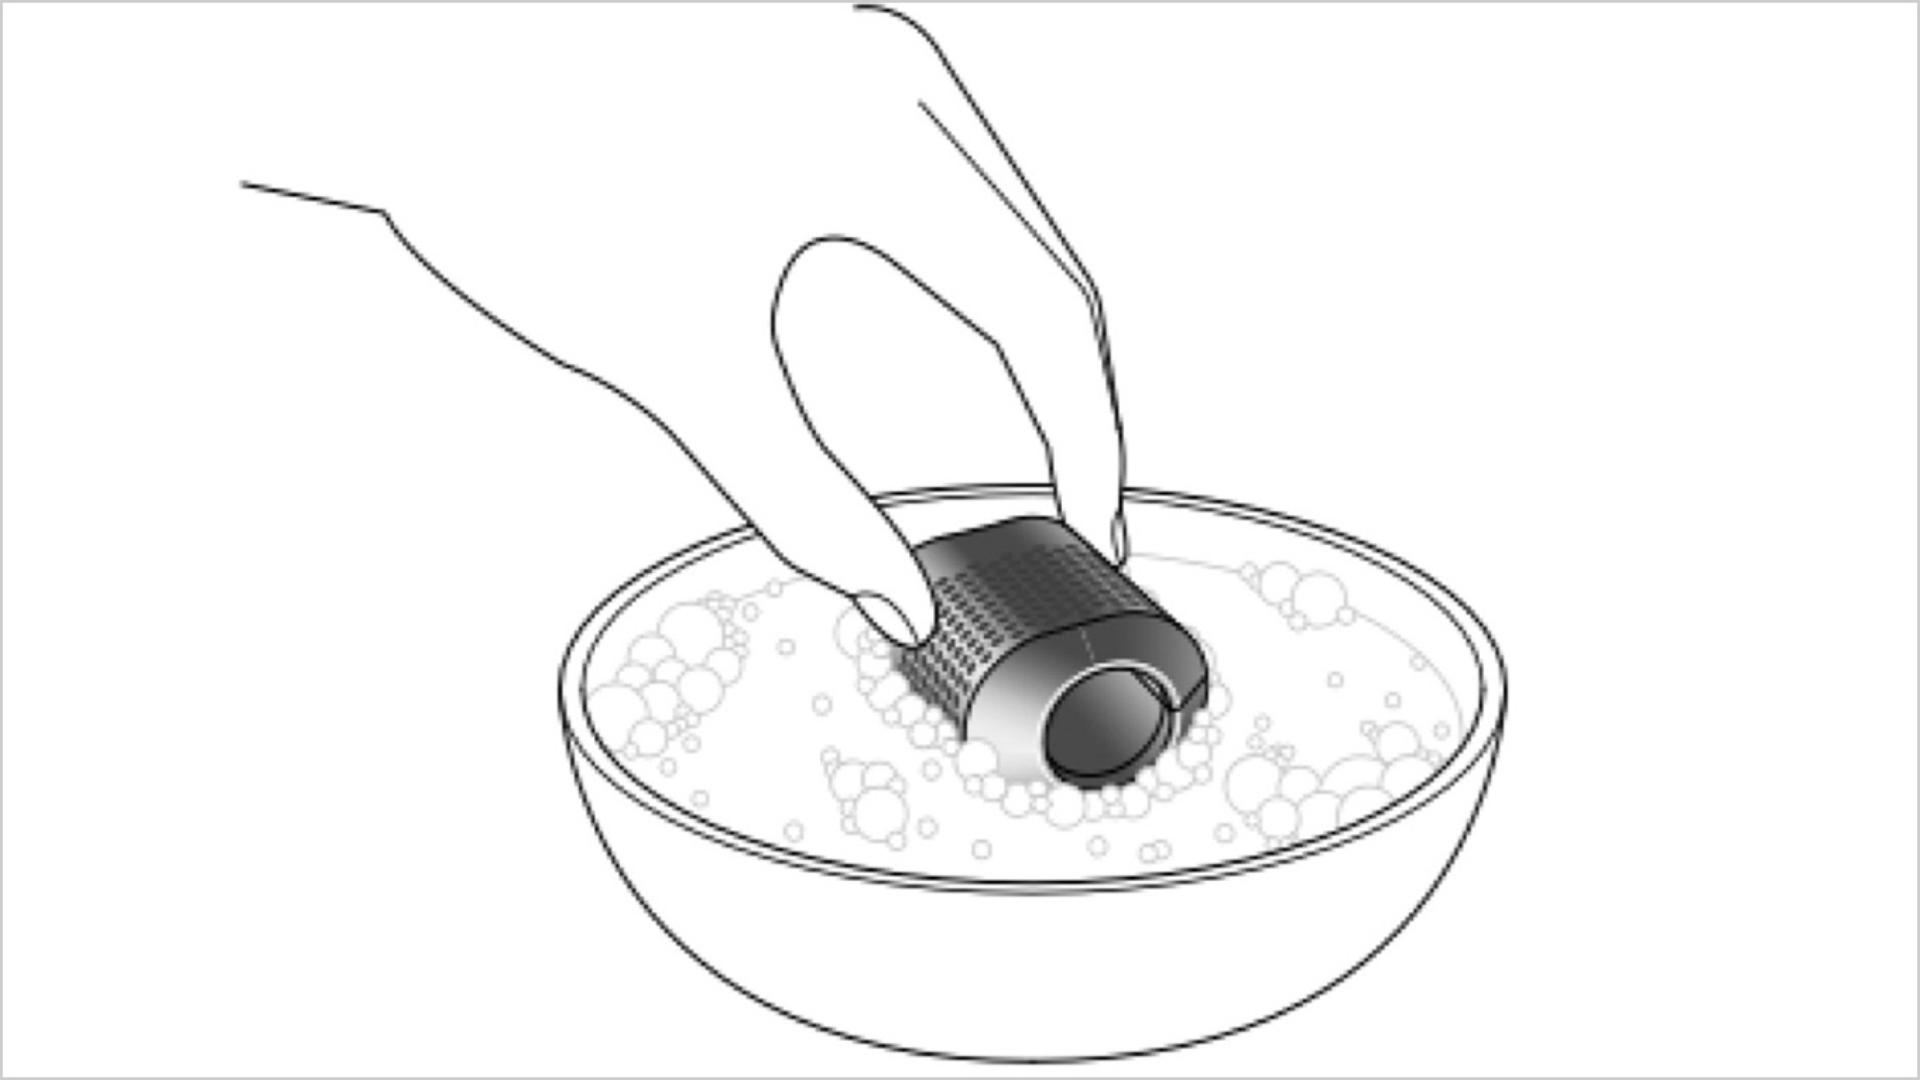 Illustration of a filter being washed in a bowl of water.